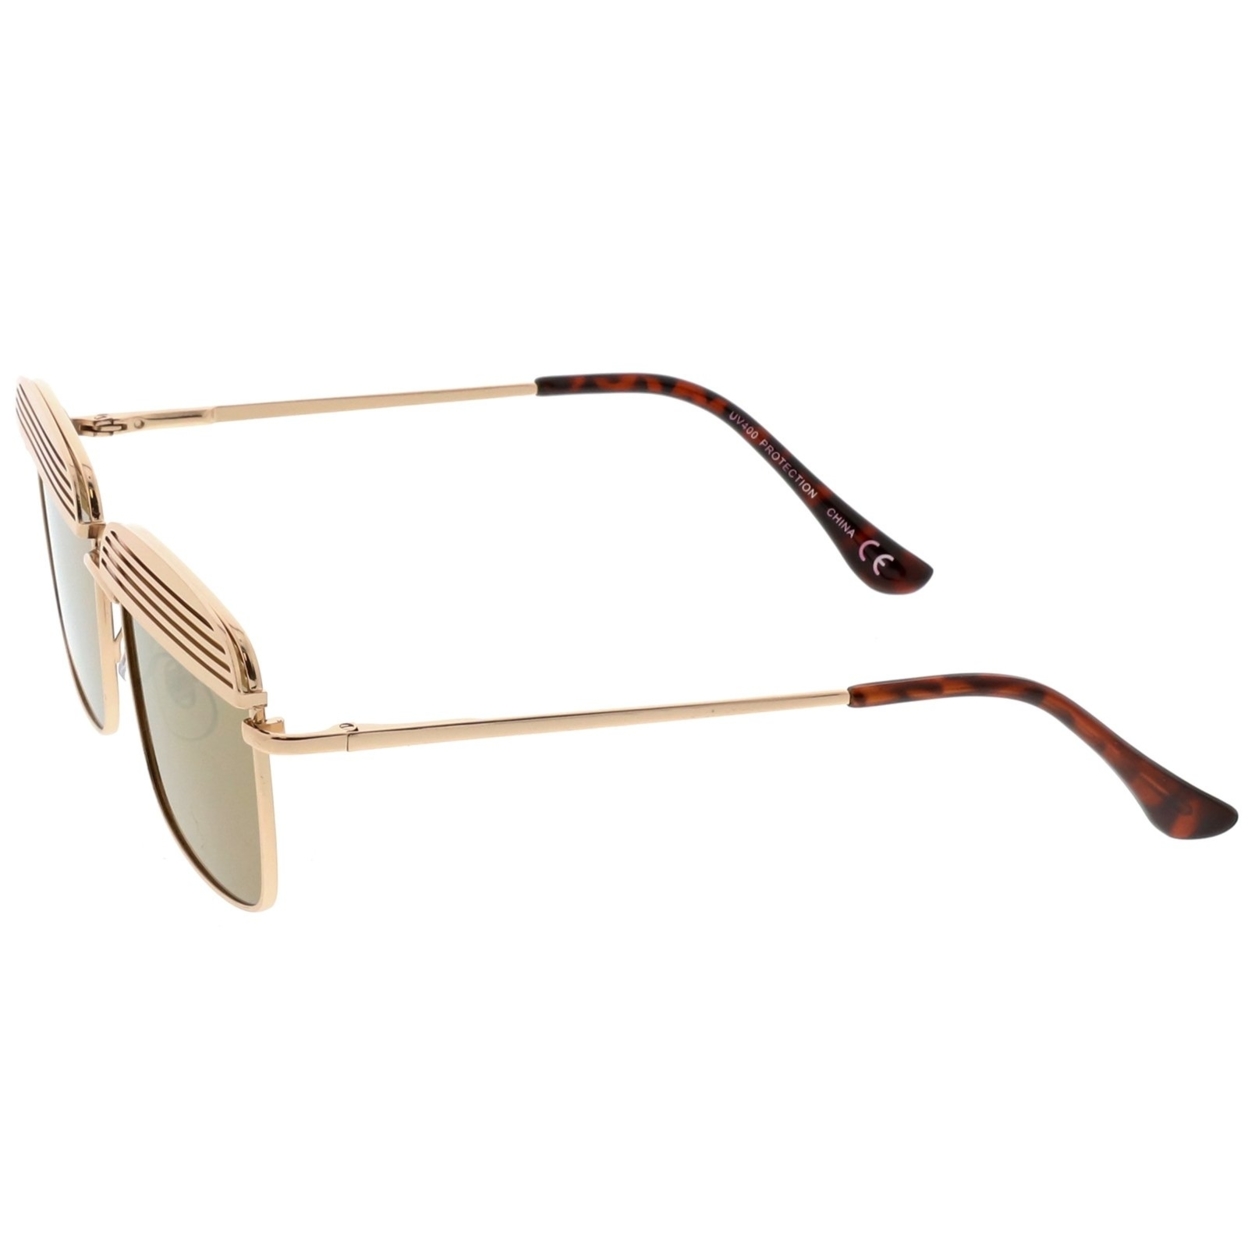 Modern Square Sunglasses With Ultra Slim Arms And Metal Covered Mirror Flat Lens 53mm - Matte Gold / Pink Mirror